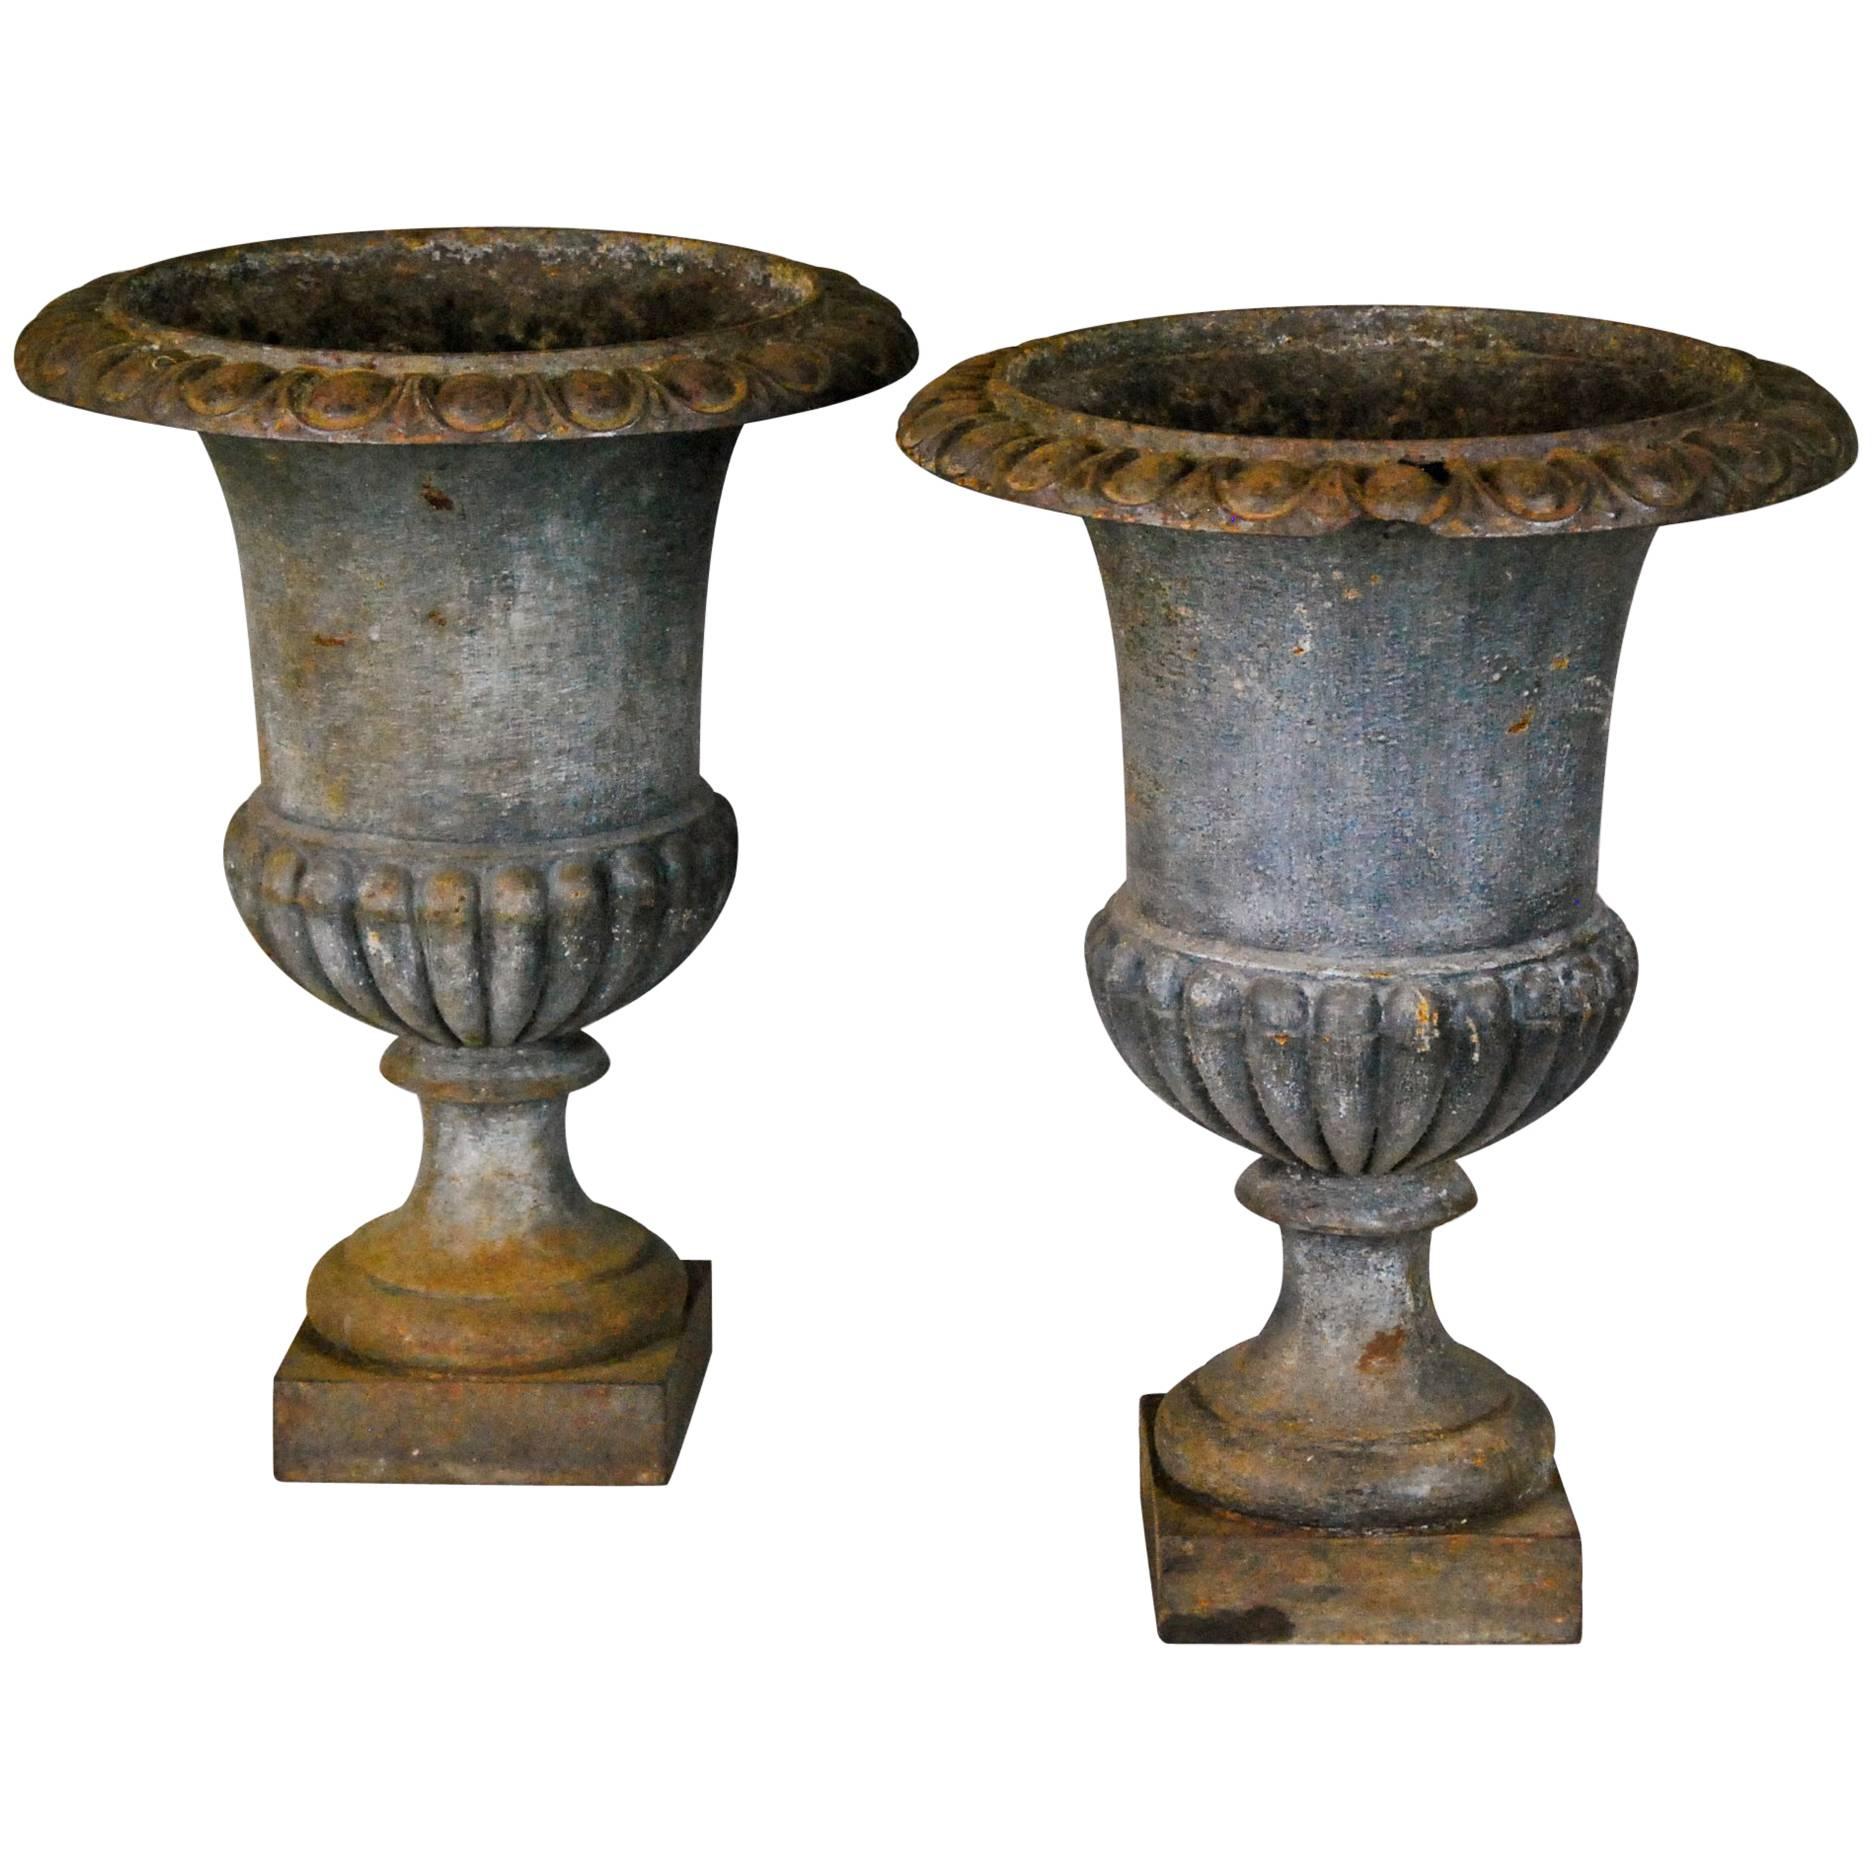 19th century Cast iron French urns